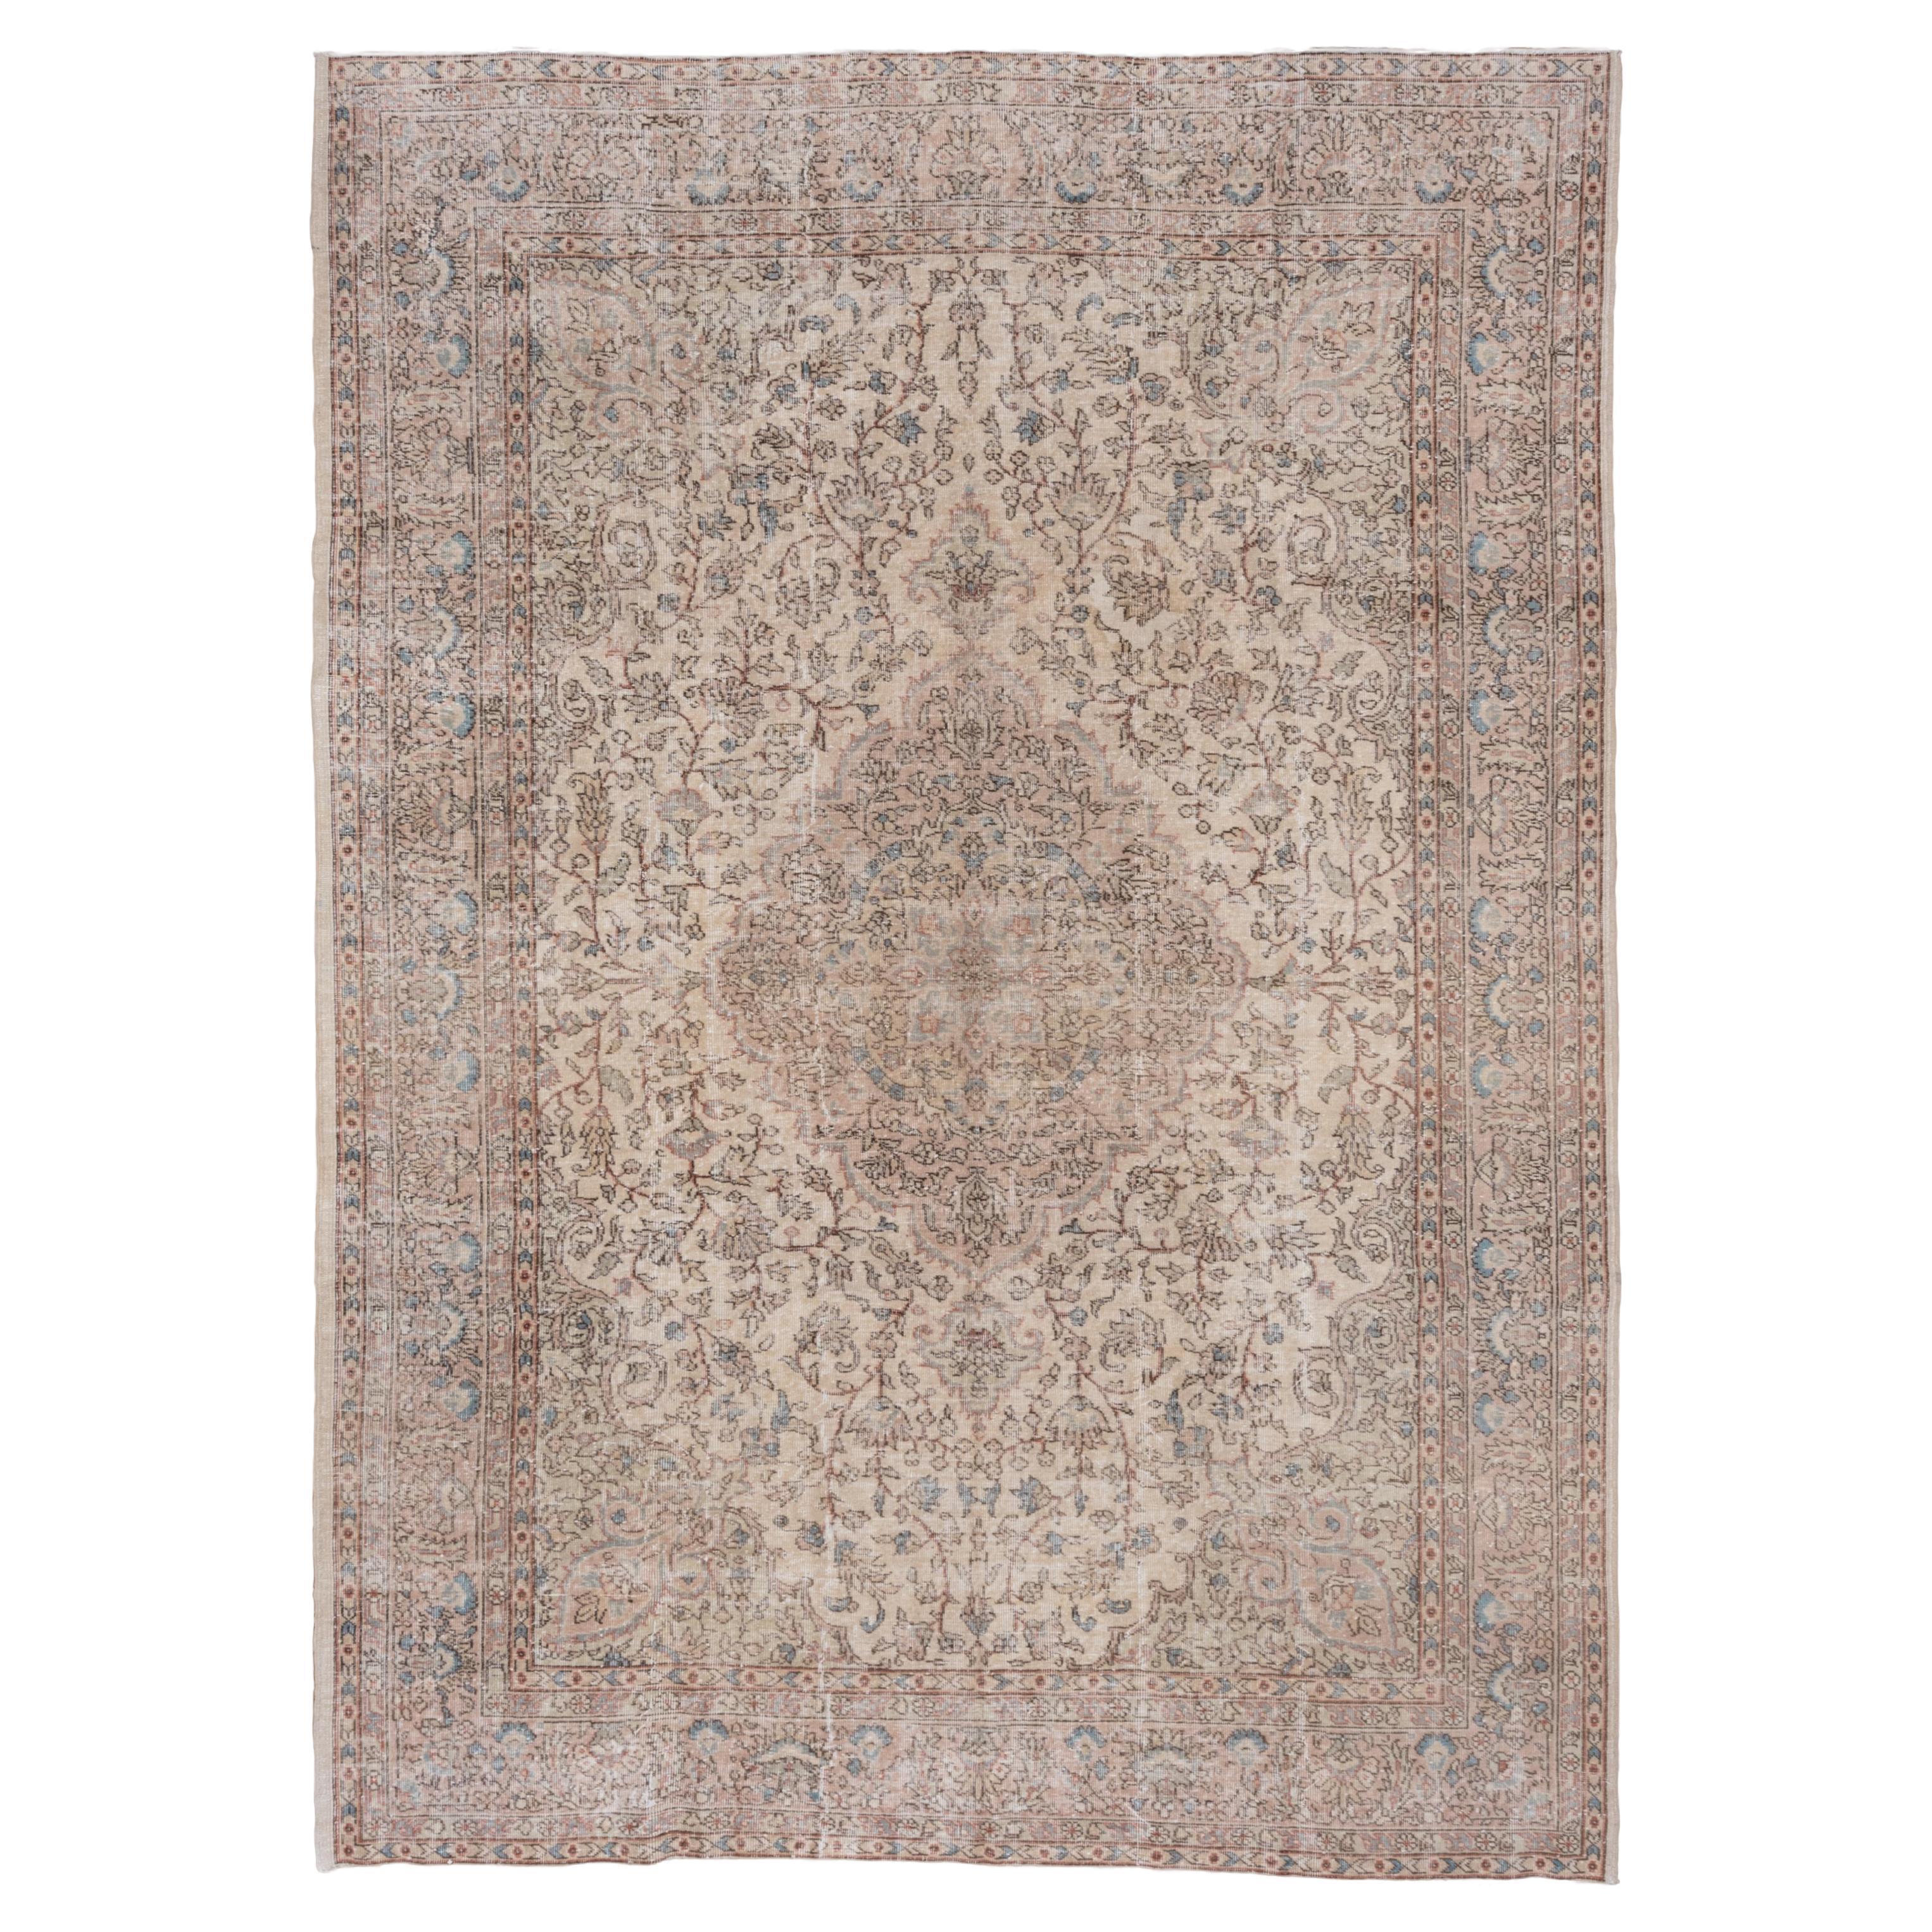 Antique Turkish Shabby Chic Rug 1960 For Sale